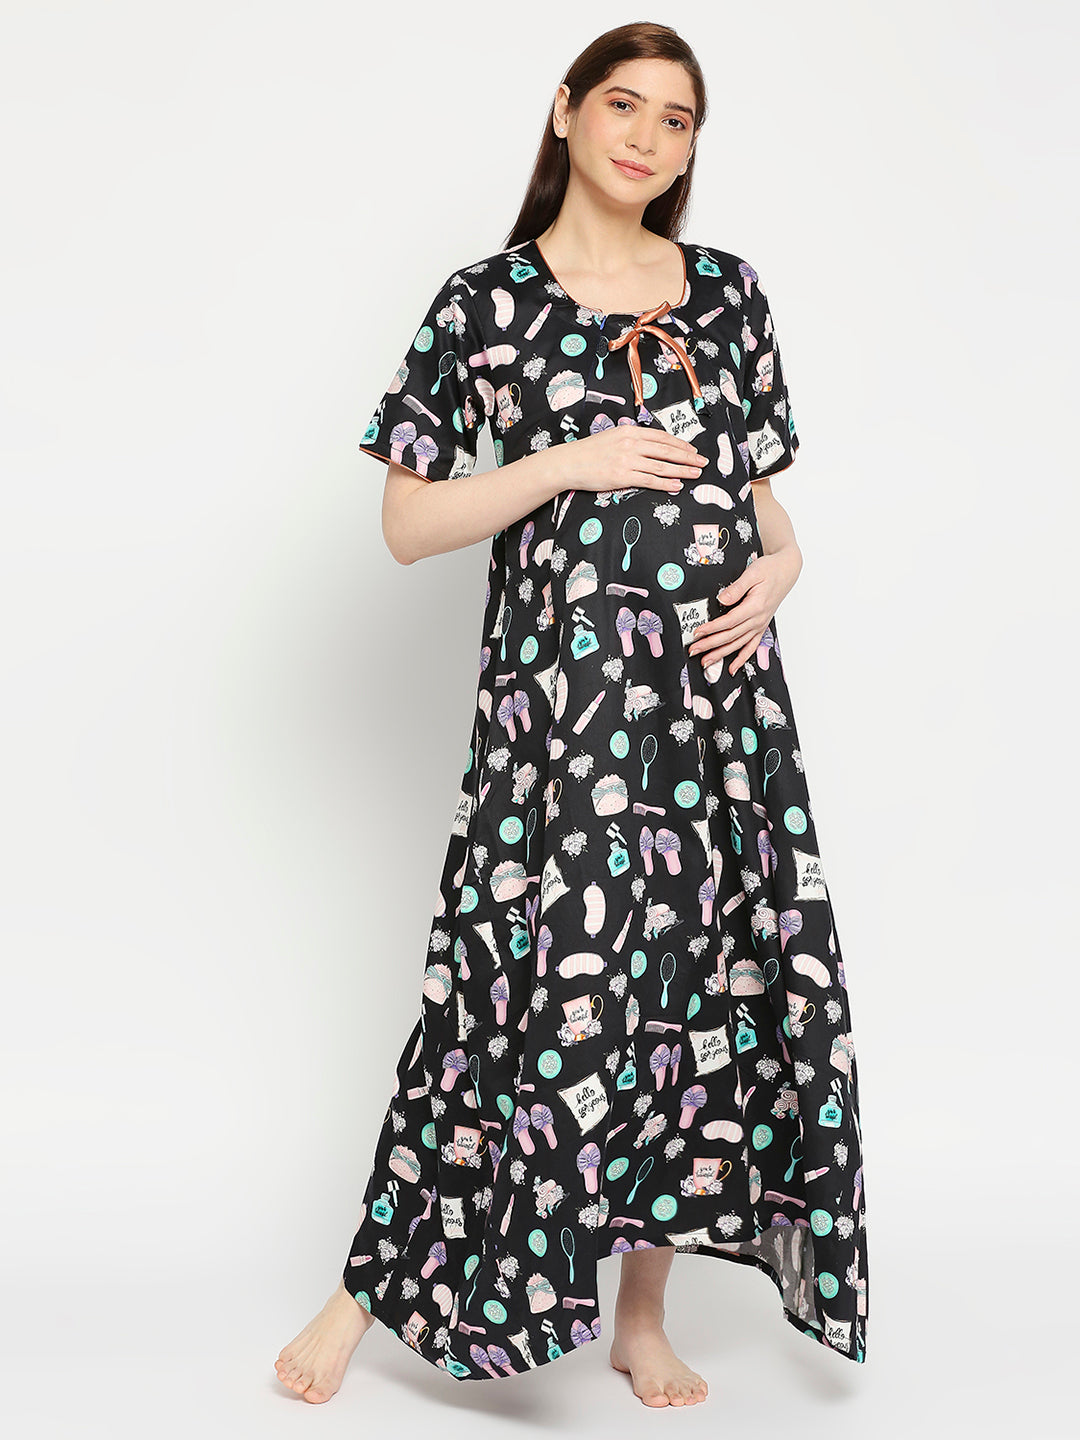 Spa Time Maternity Gown -Round Neck Gown with 2 Invisible Zips for Feeding